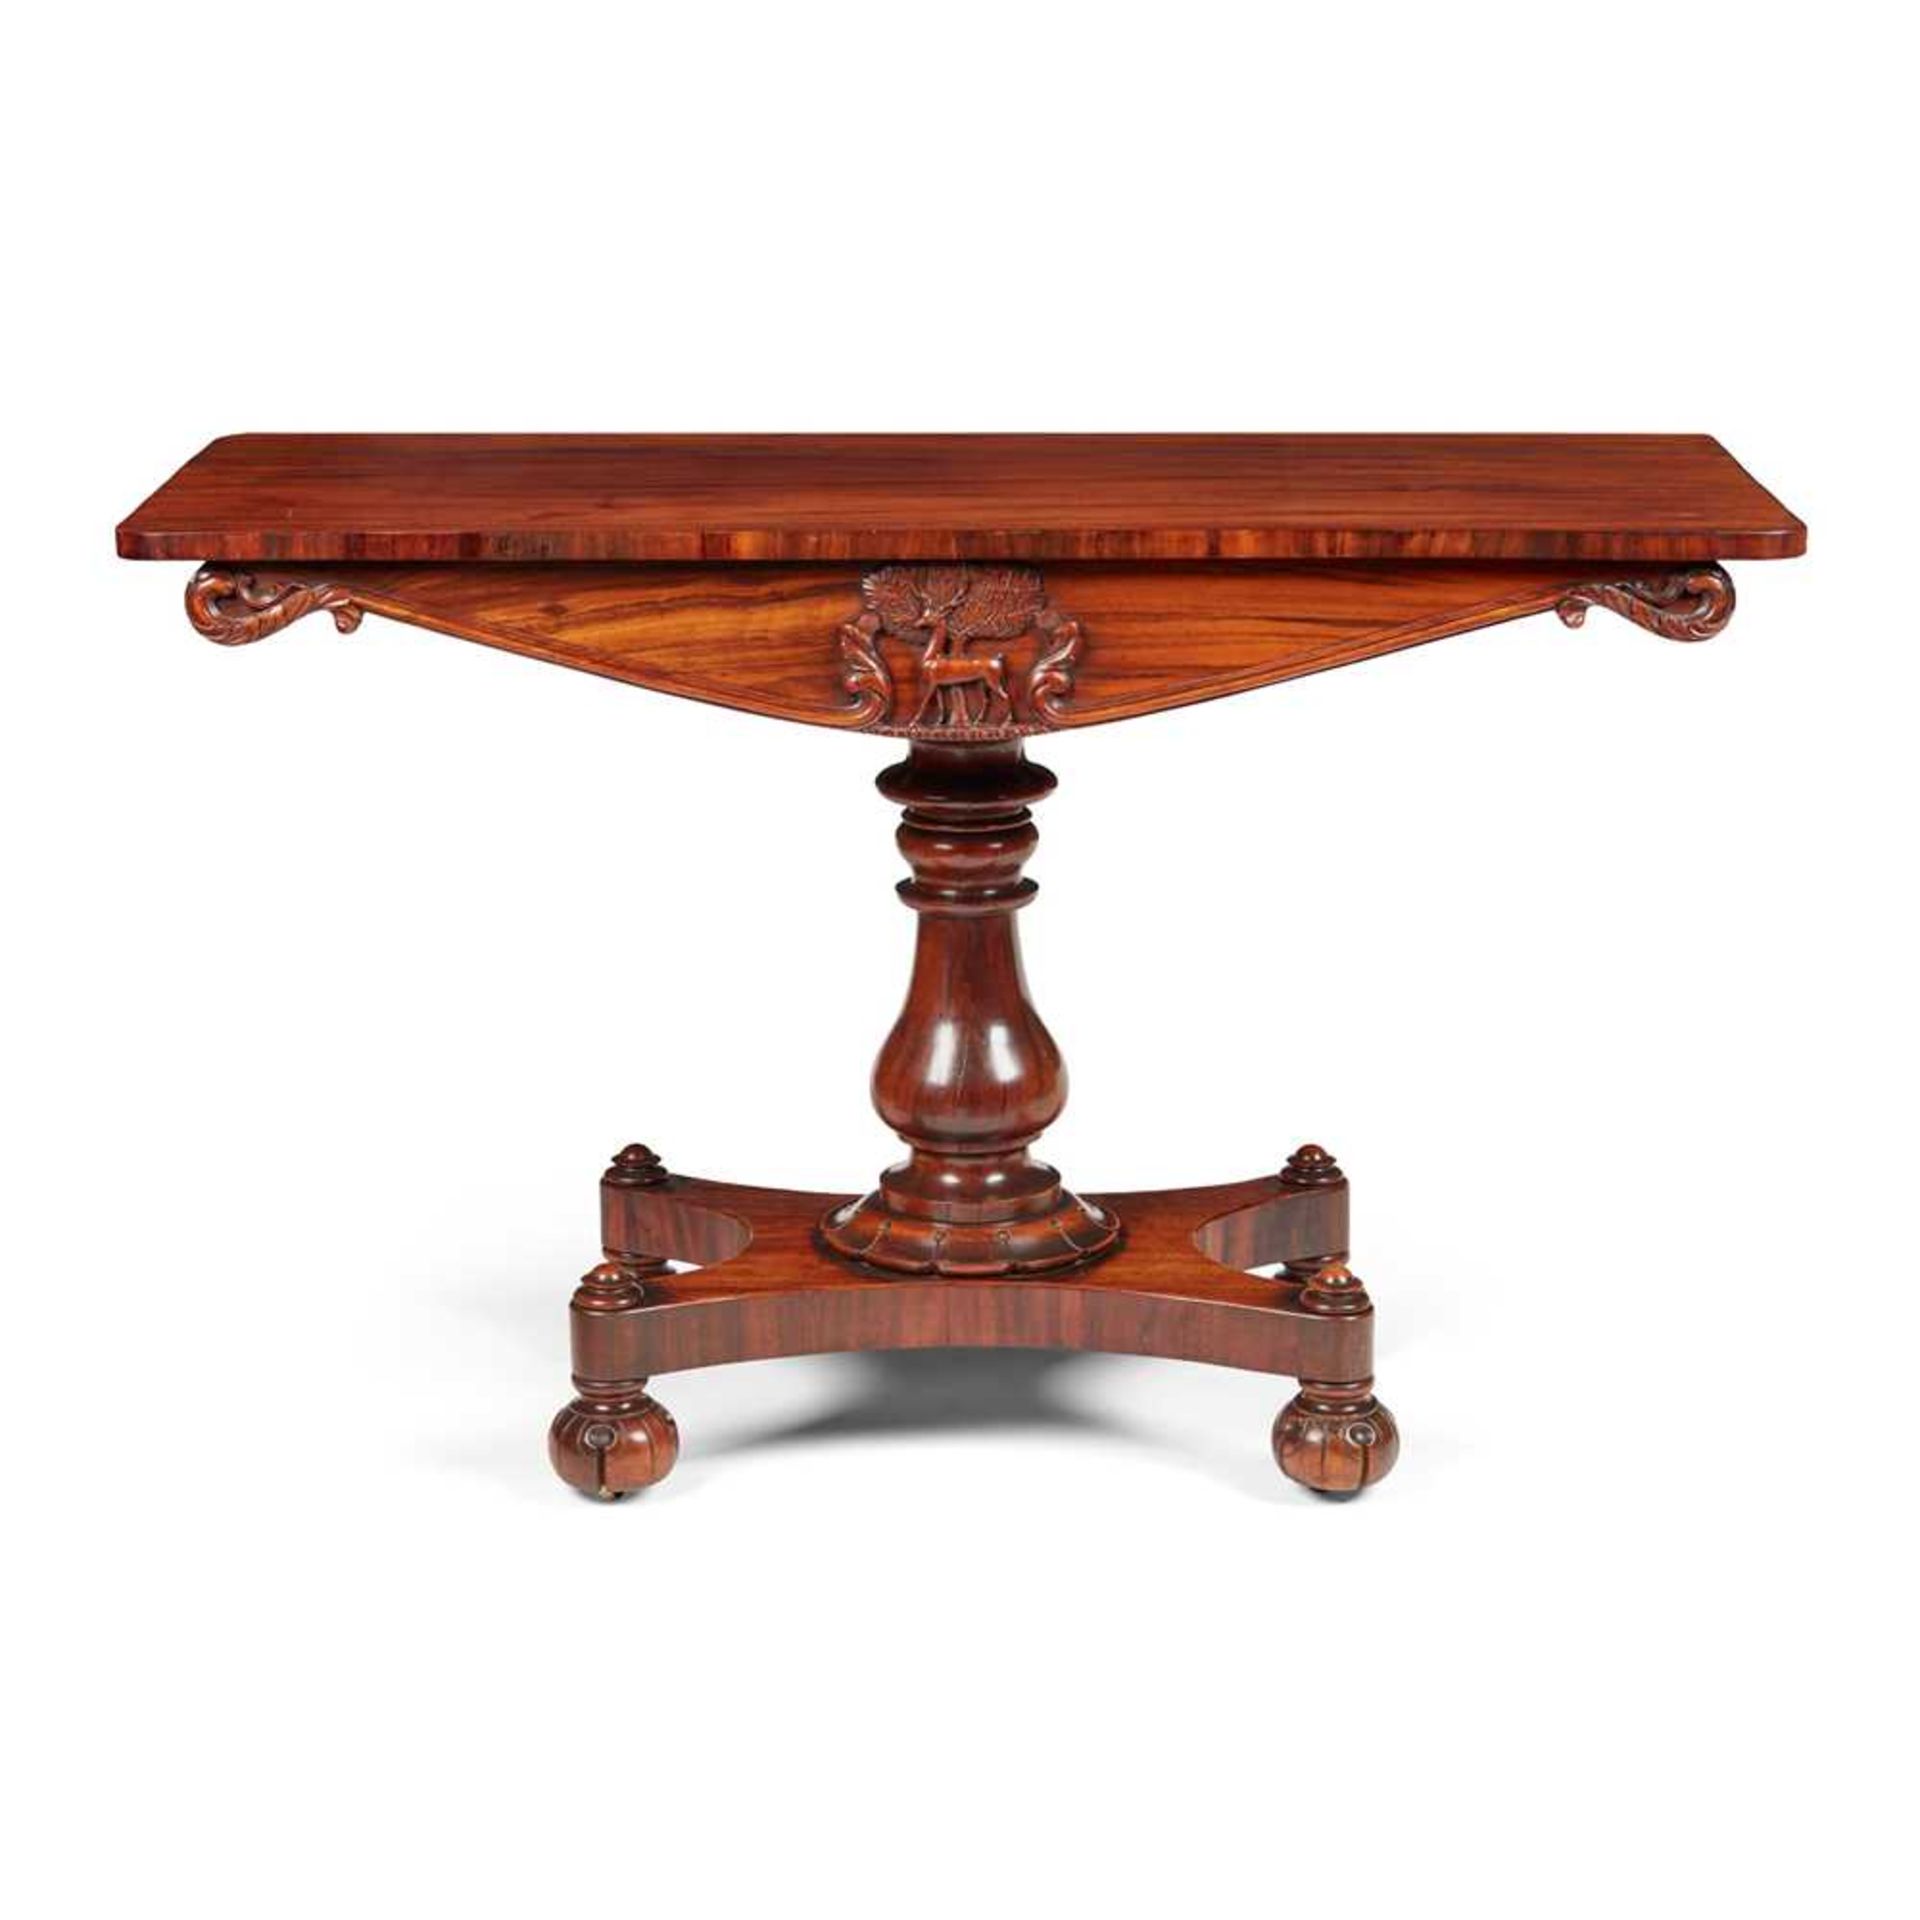 A FINE REGENCY GONCALO ALVES CENTRE TABLE, ATTRIBUTED TO JAMES MEIN OF KELSO EARLY 19TH CENTURY